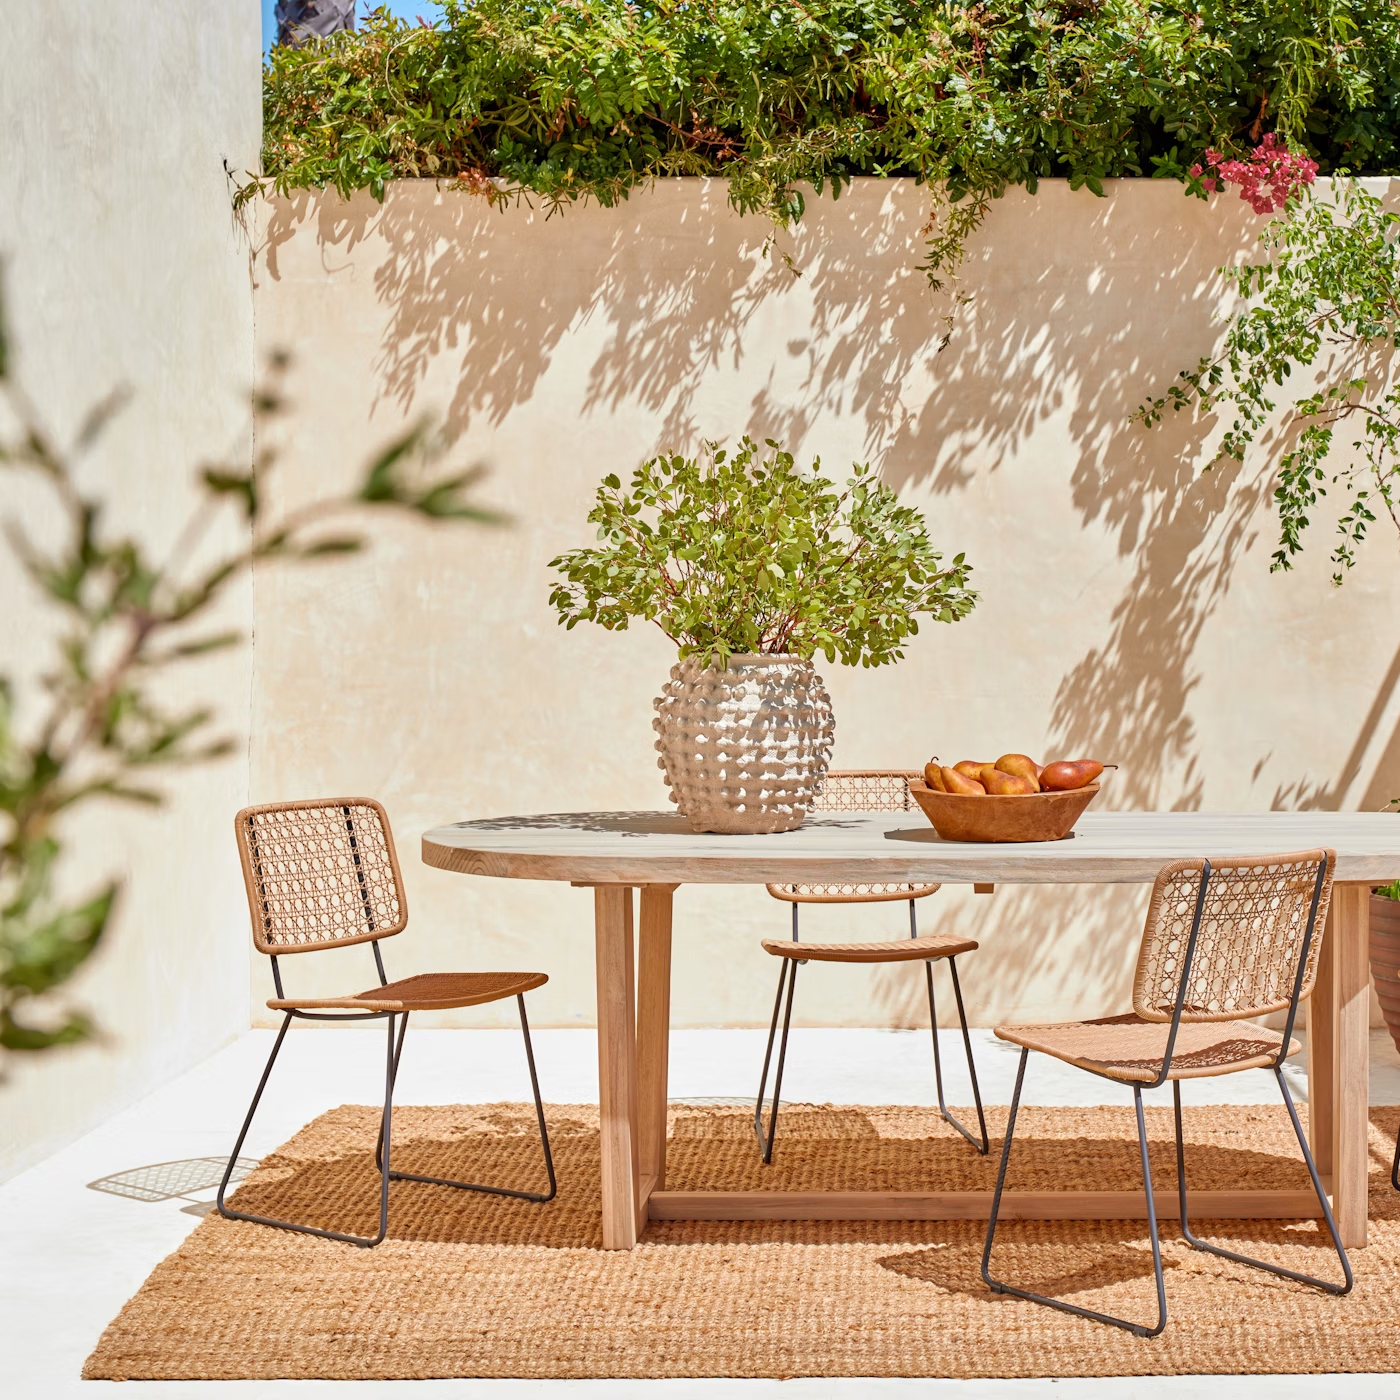 An outdoor dining table with chairs and a rug.